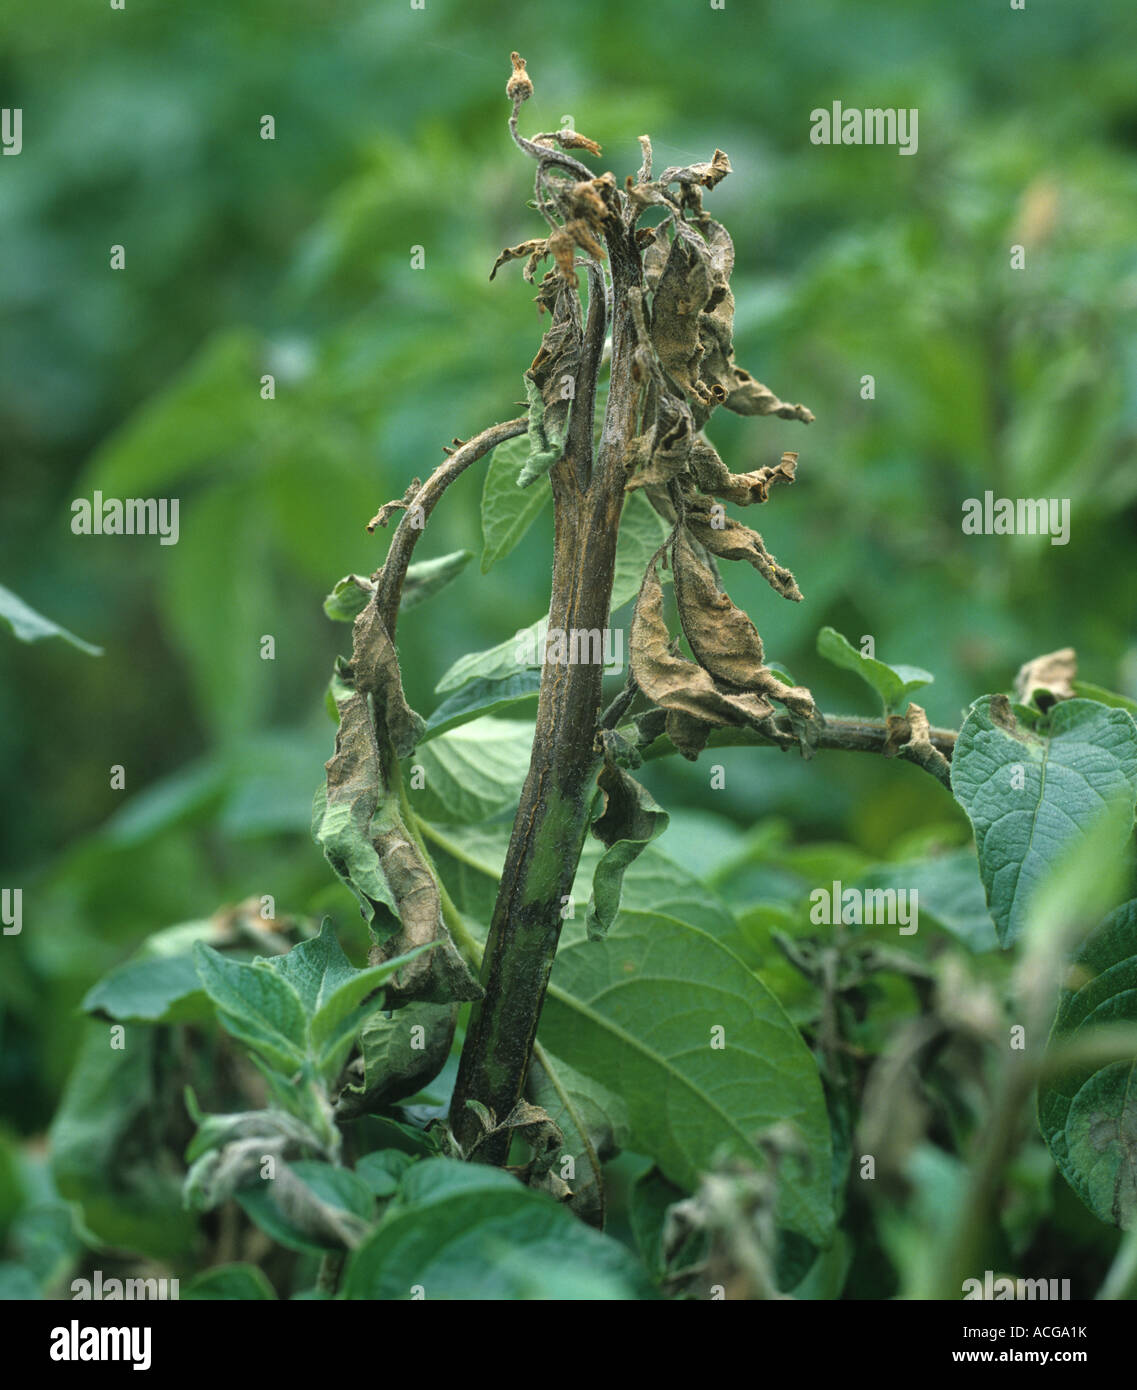 Potato late blight Phytophthora infestans on diseased plant leaves and apices Stock Photo